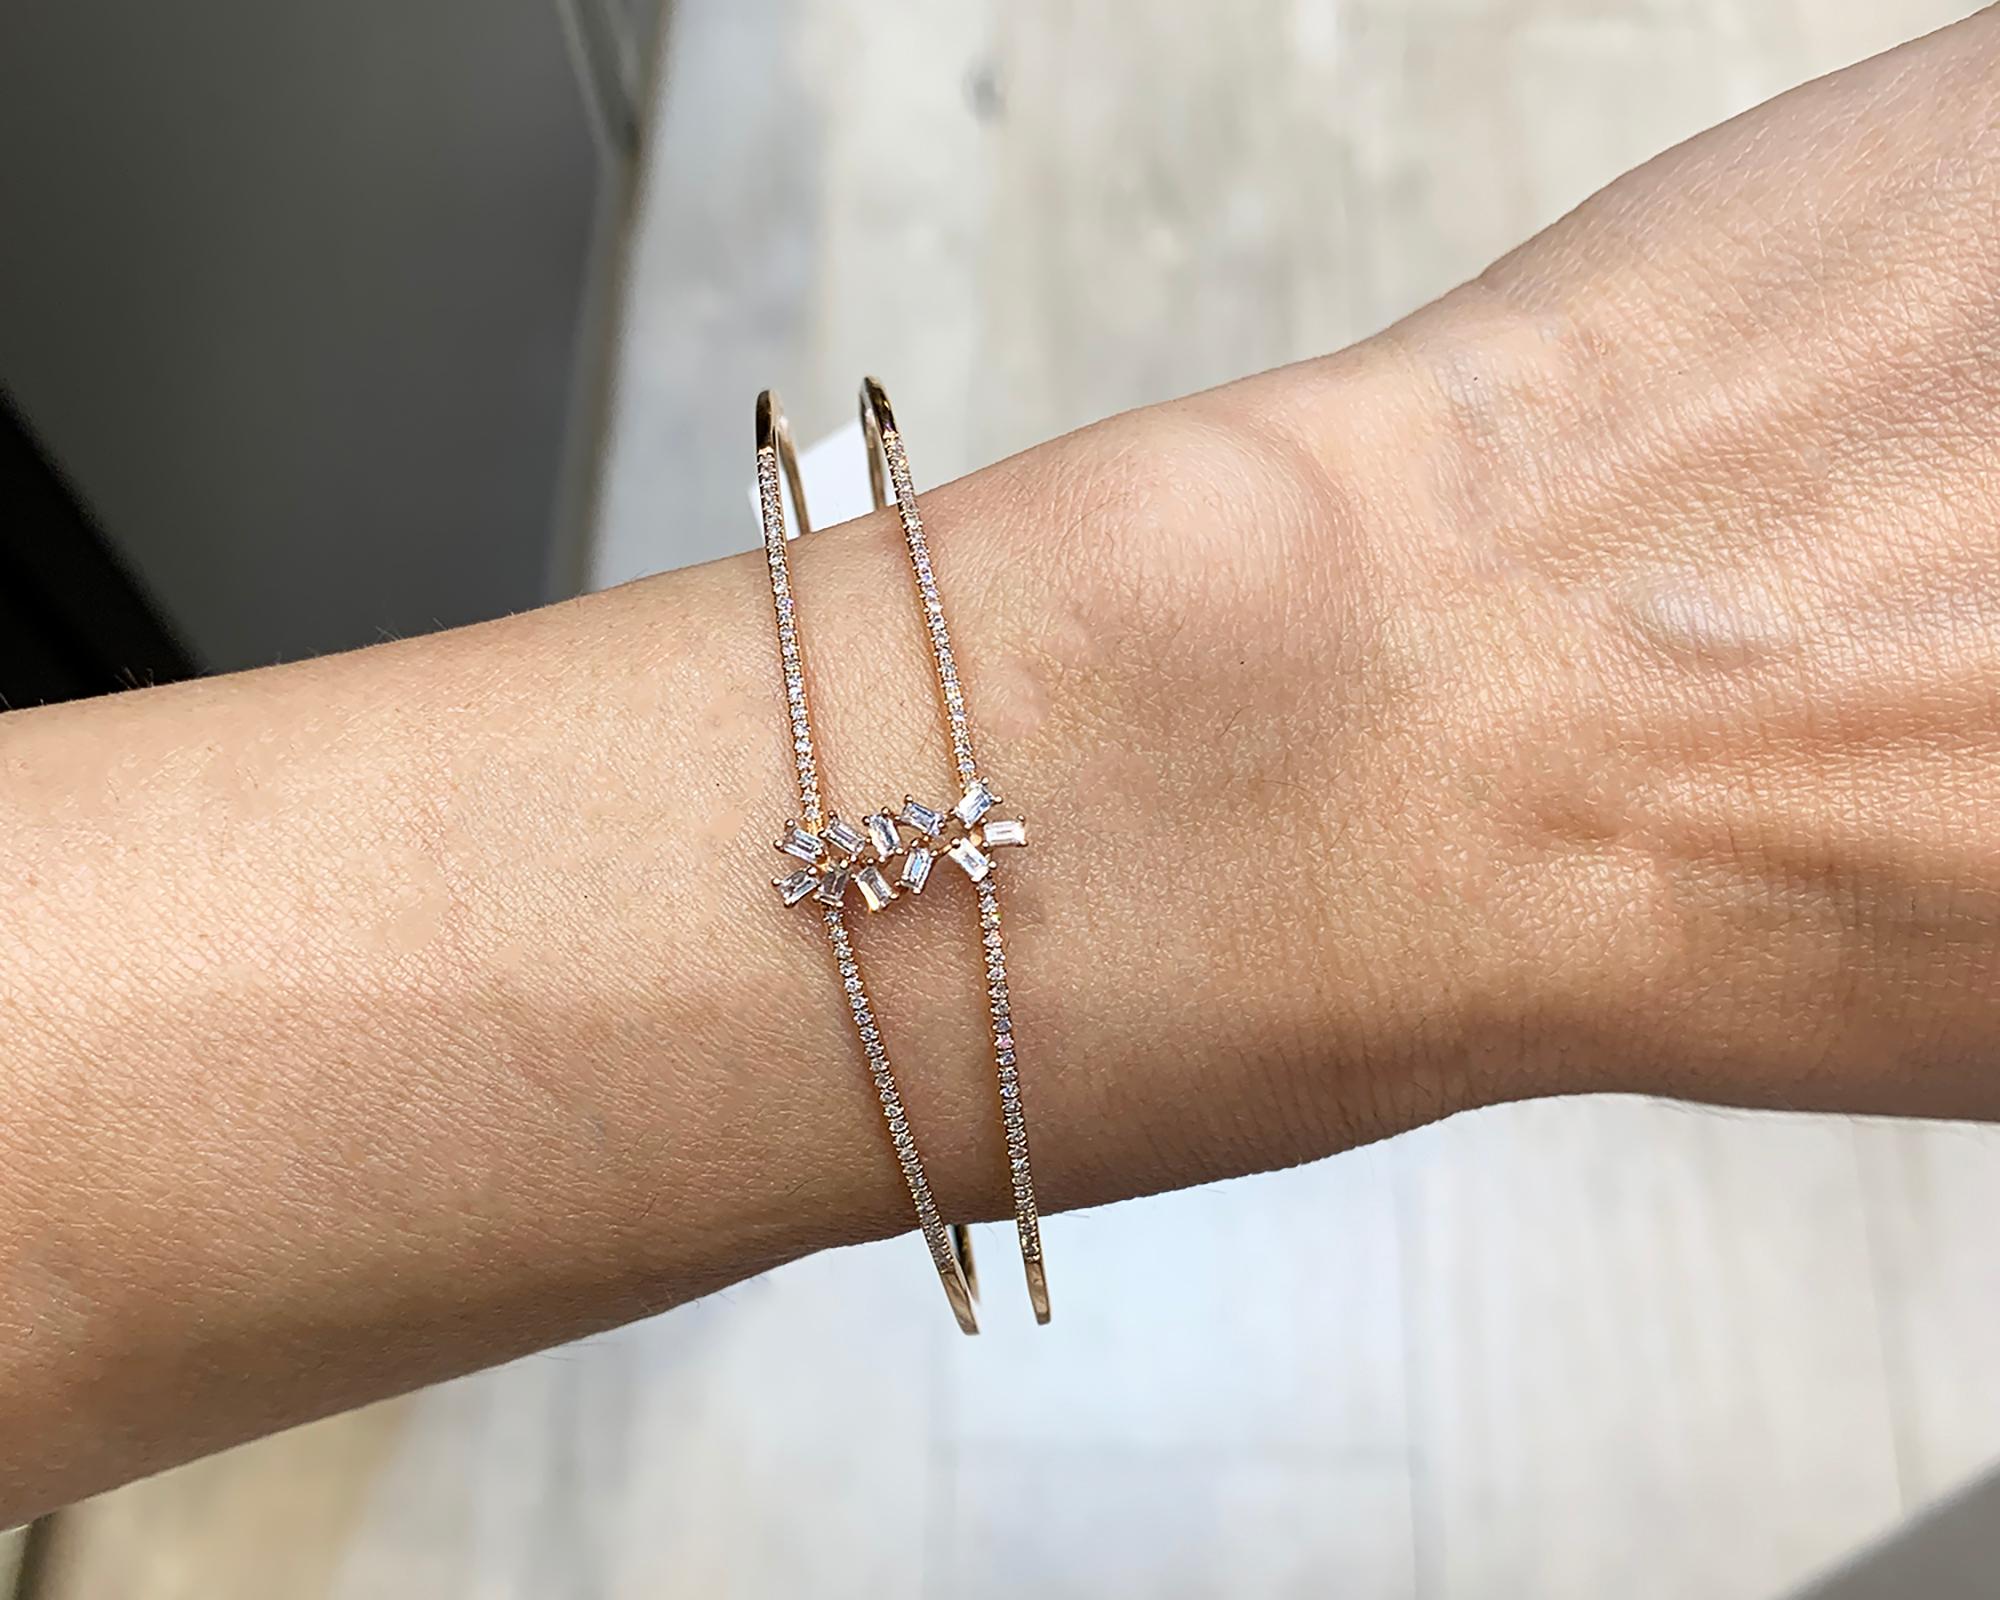 A cute bangle made in 14k rose gold and decorated with diamonds.
11 baguette diamonds weighing 0.28 carats.
100 round diamonds weighing 0.25 carats.
Total diamond weight is 0.53 carats.
14k rose gold weighs 8.65 grams.